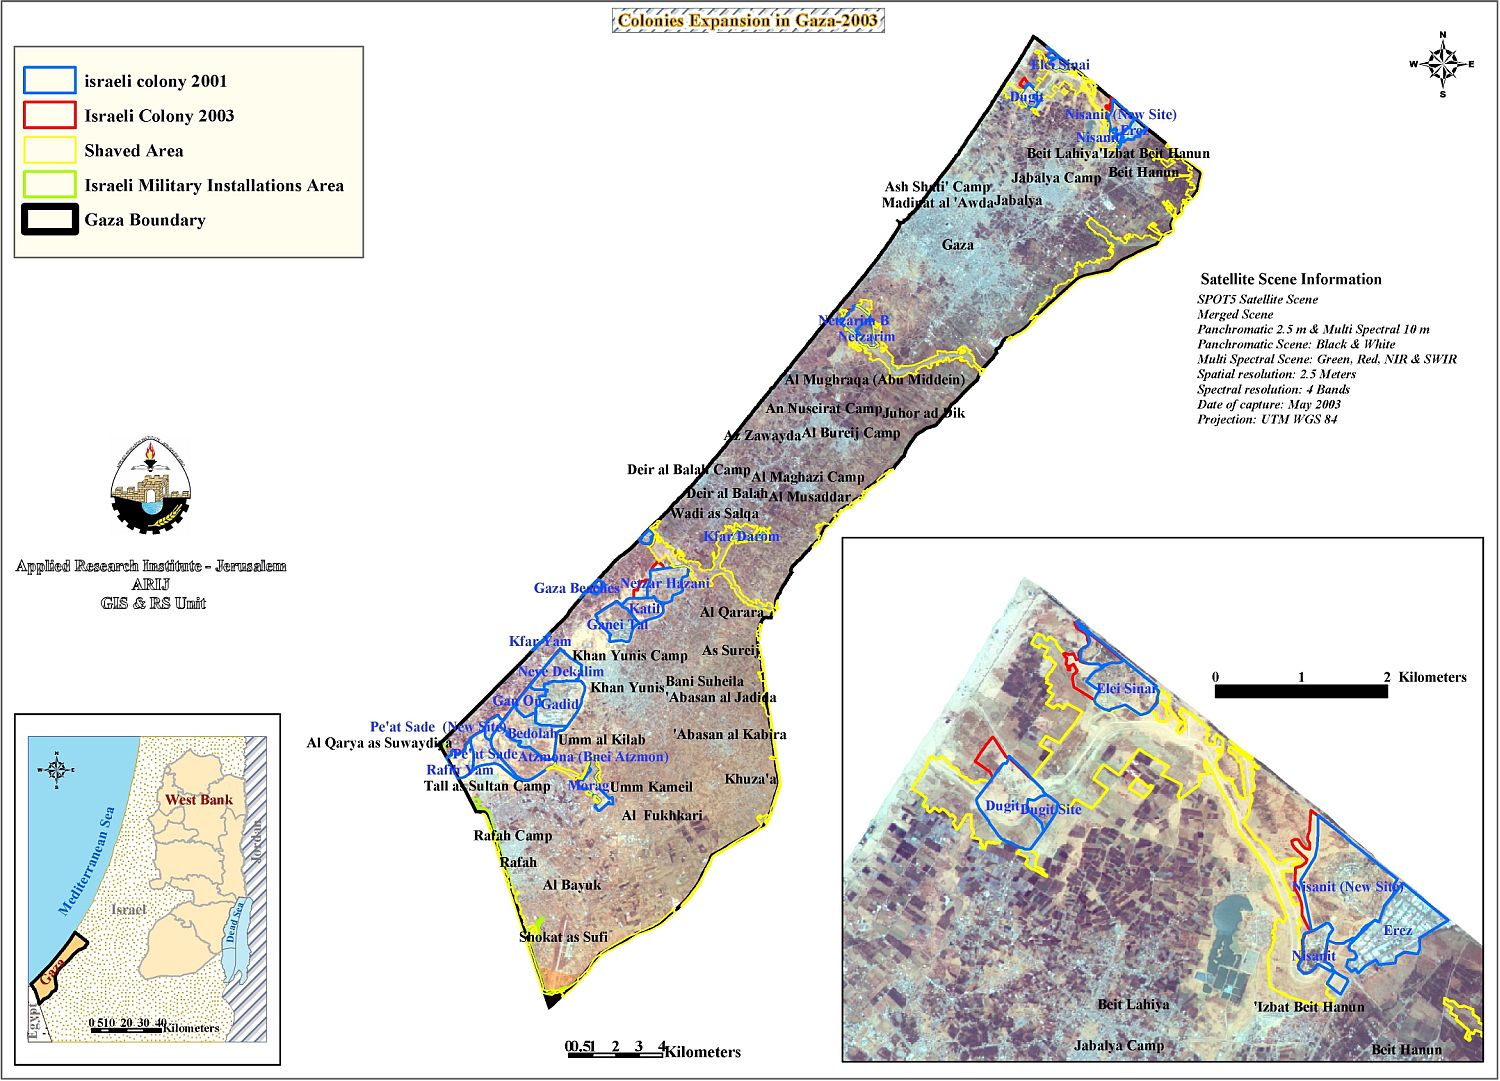 Colonies Expansion in Gaza-2003 Map